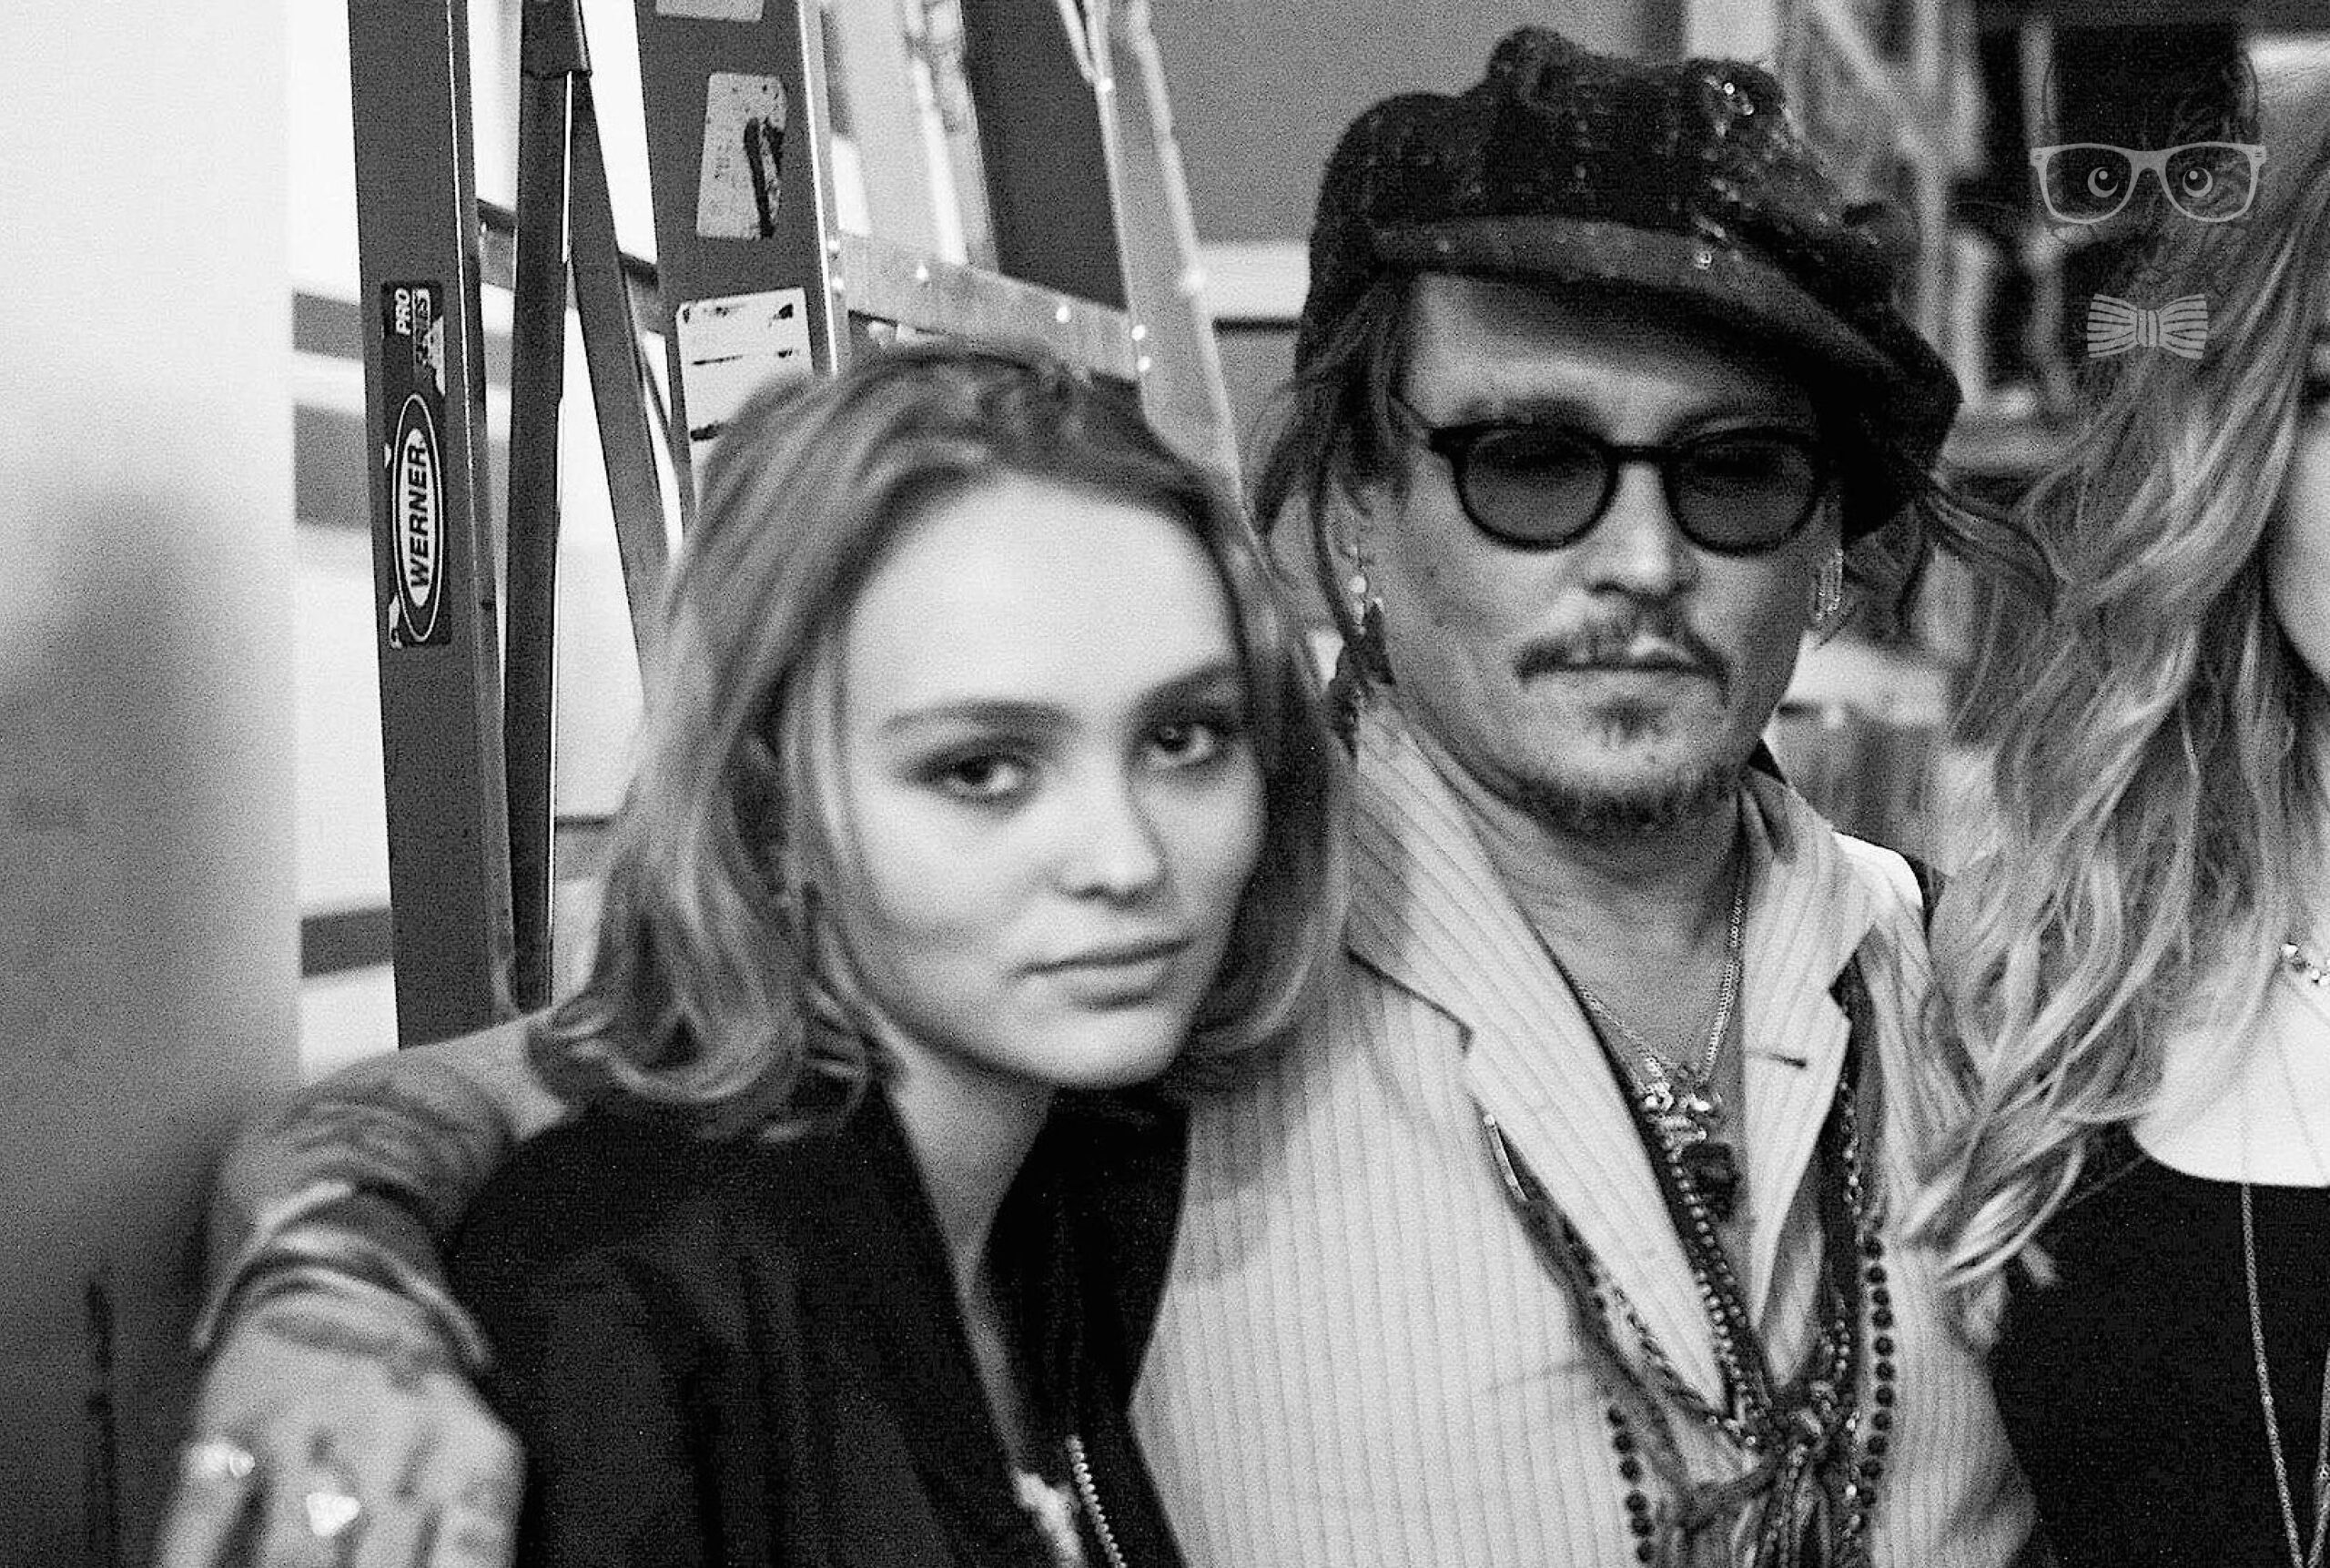 Lily Rose Depp The Eldest Daughter Of Johnny Depp Dedicated A Message To Her Father Scaled